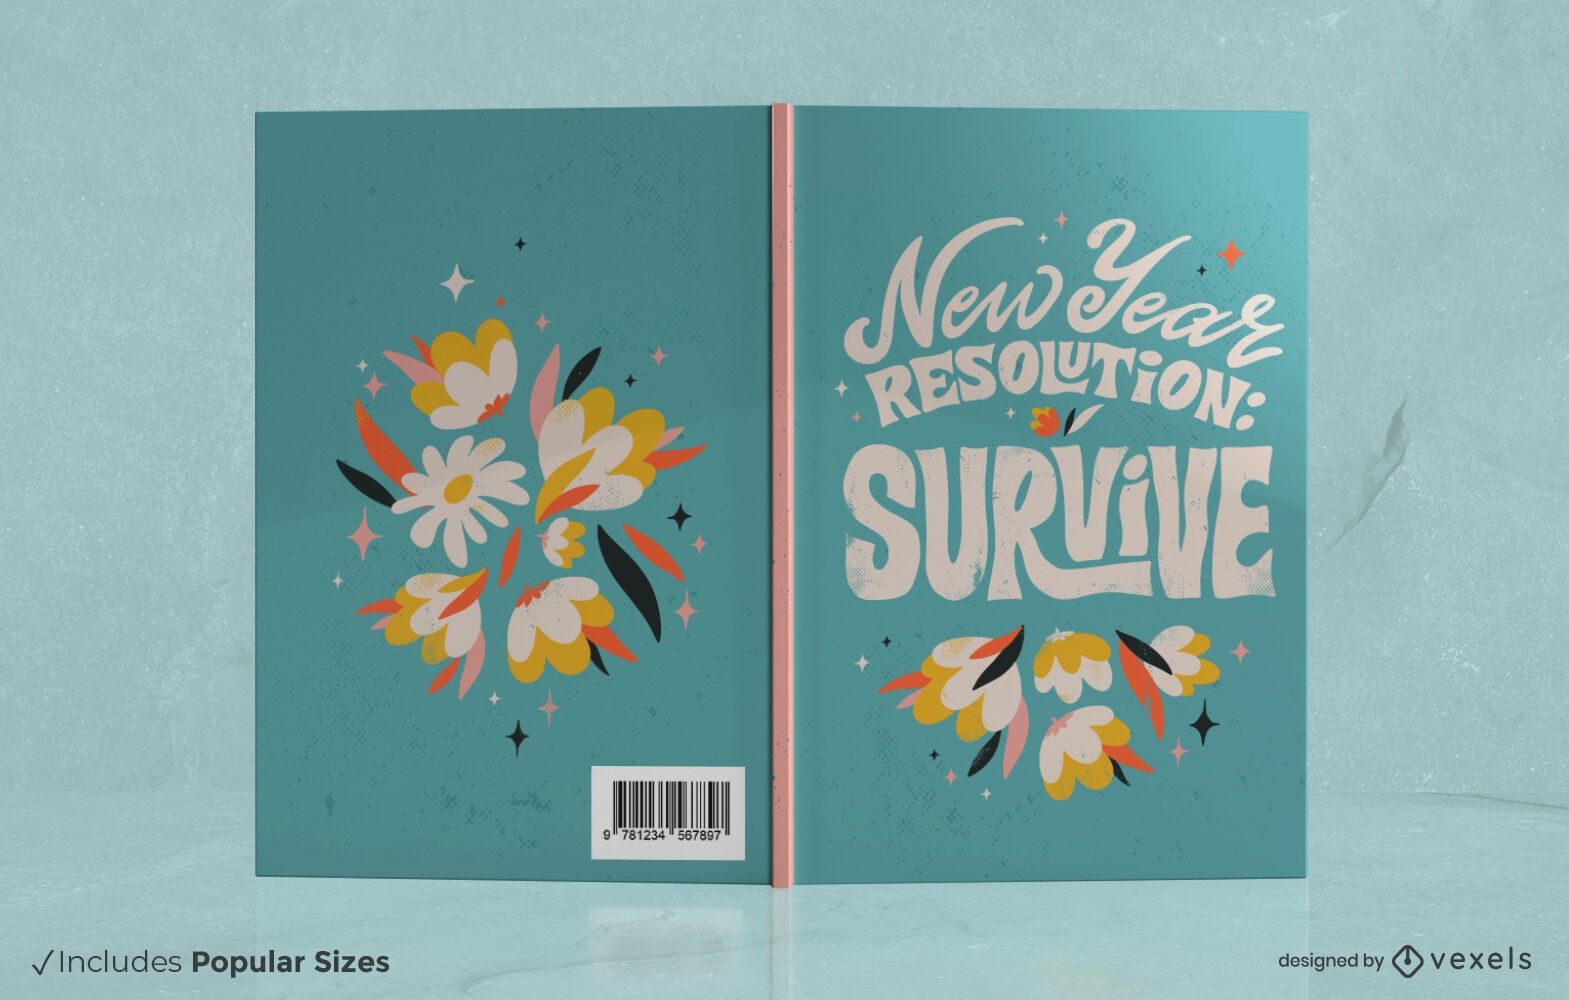 New Year resolution book cover design